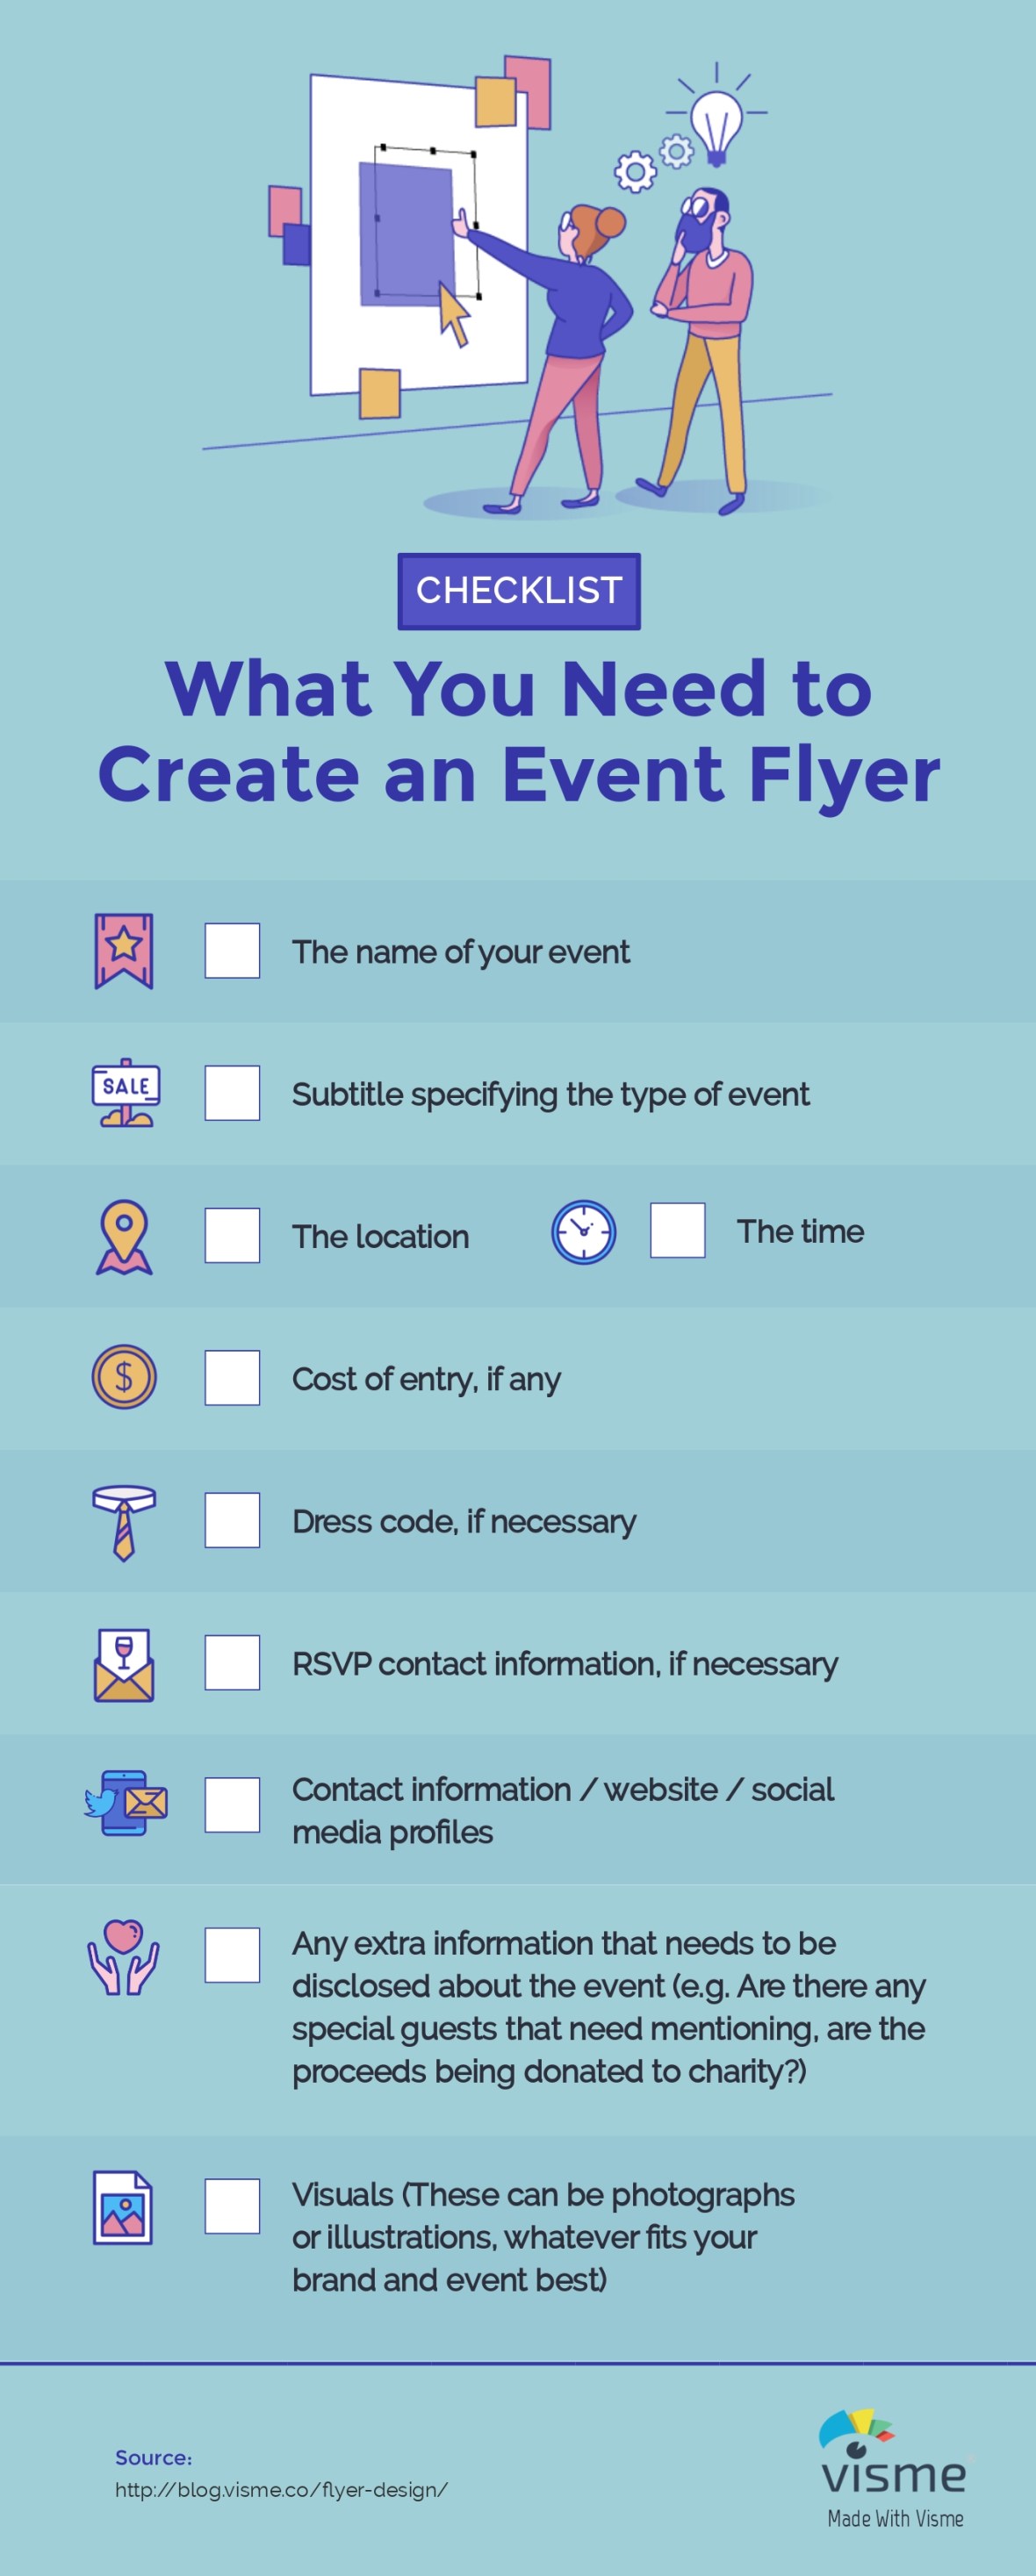 There are plenty of beautiful flyers you’ll see on Google or Pinterest. And when you find an inspiration, make sure to tick off every item on this infographic checklist Visme created so you can make a flyer like a professional designer created it.